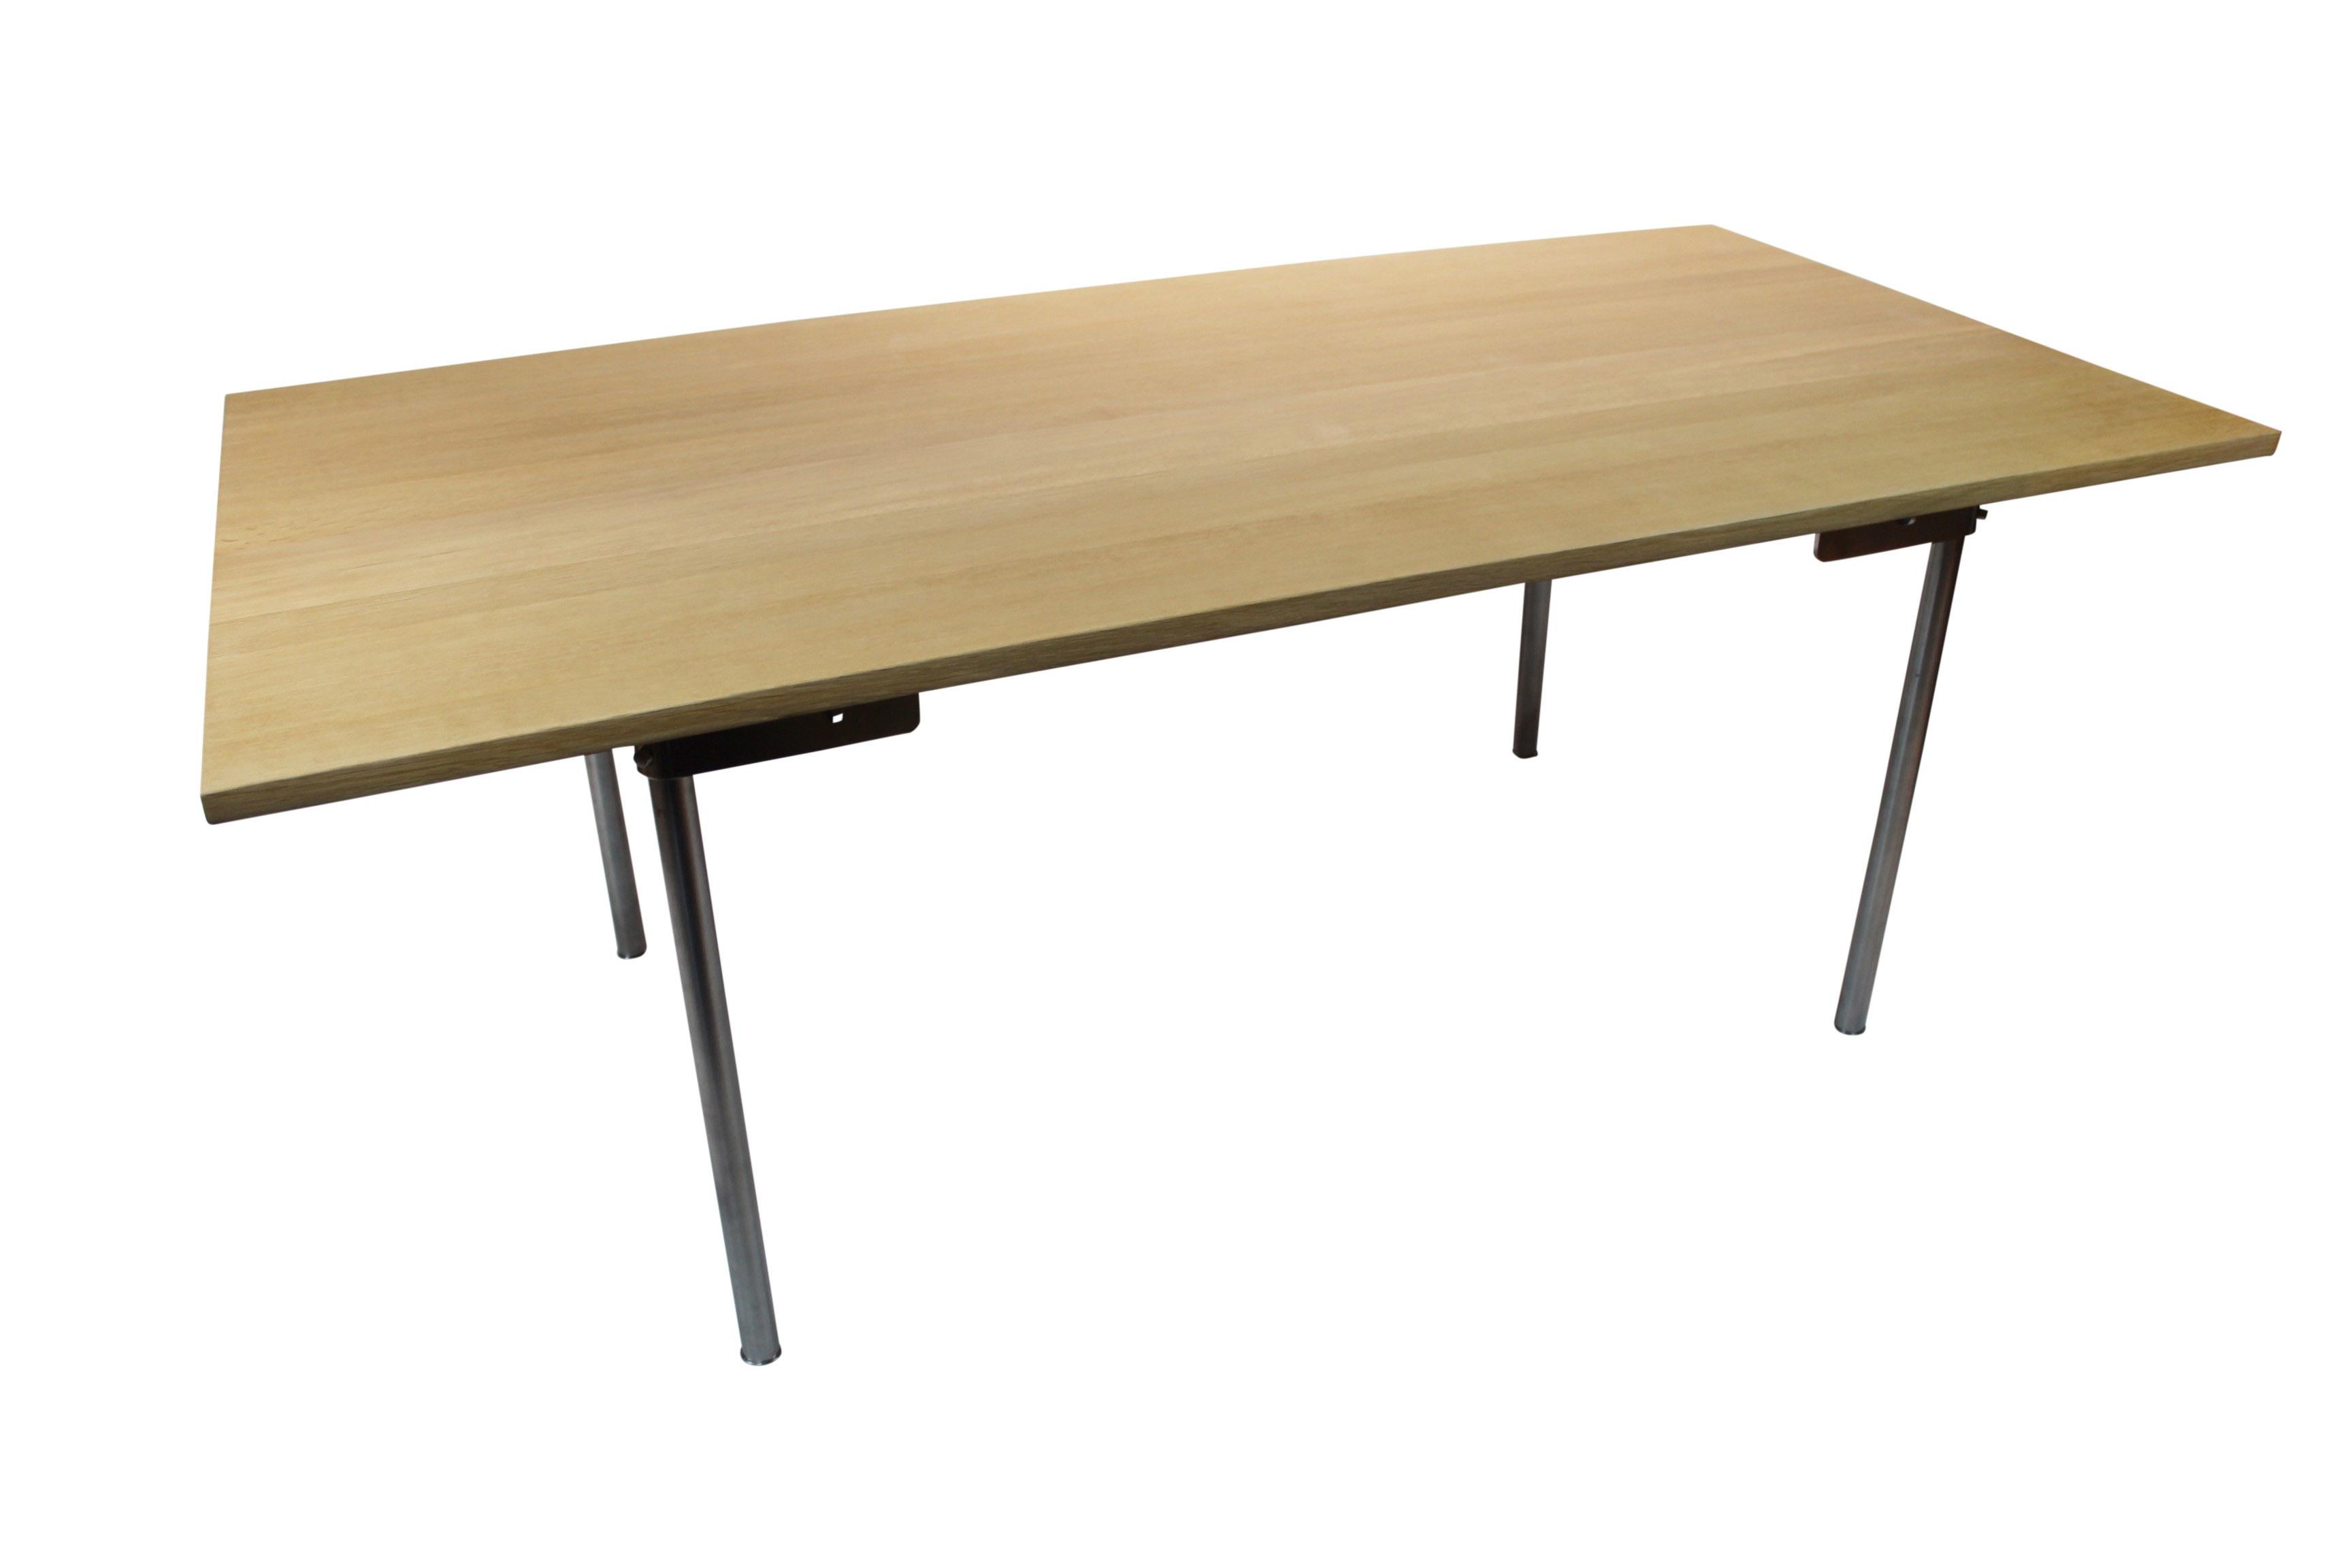 Dining table, model CH318, designed by Hans J. Wegner in 1960 and manufactured by Tranekær Furniture on behalf of Carl Hansen & Son in 2003. The table is of oak and stainless steel, and in great vintage condition.